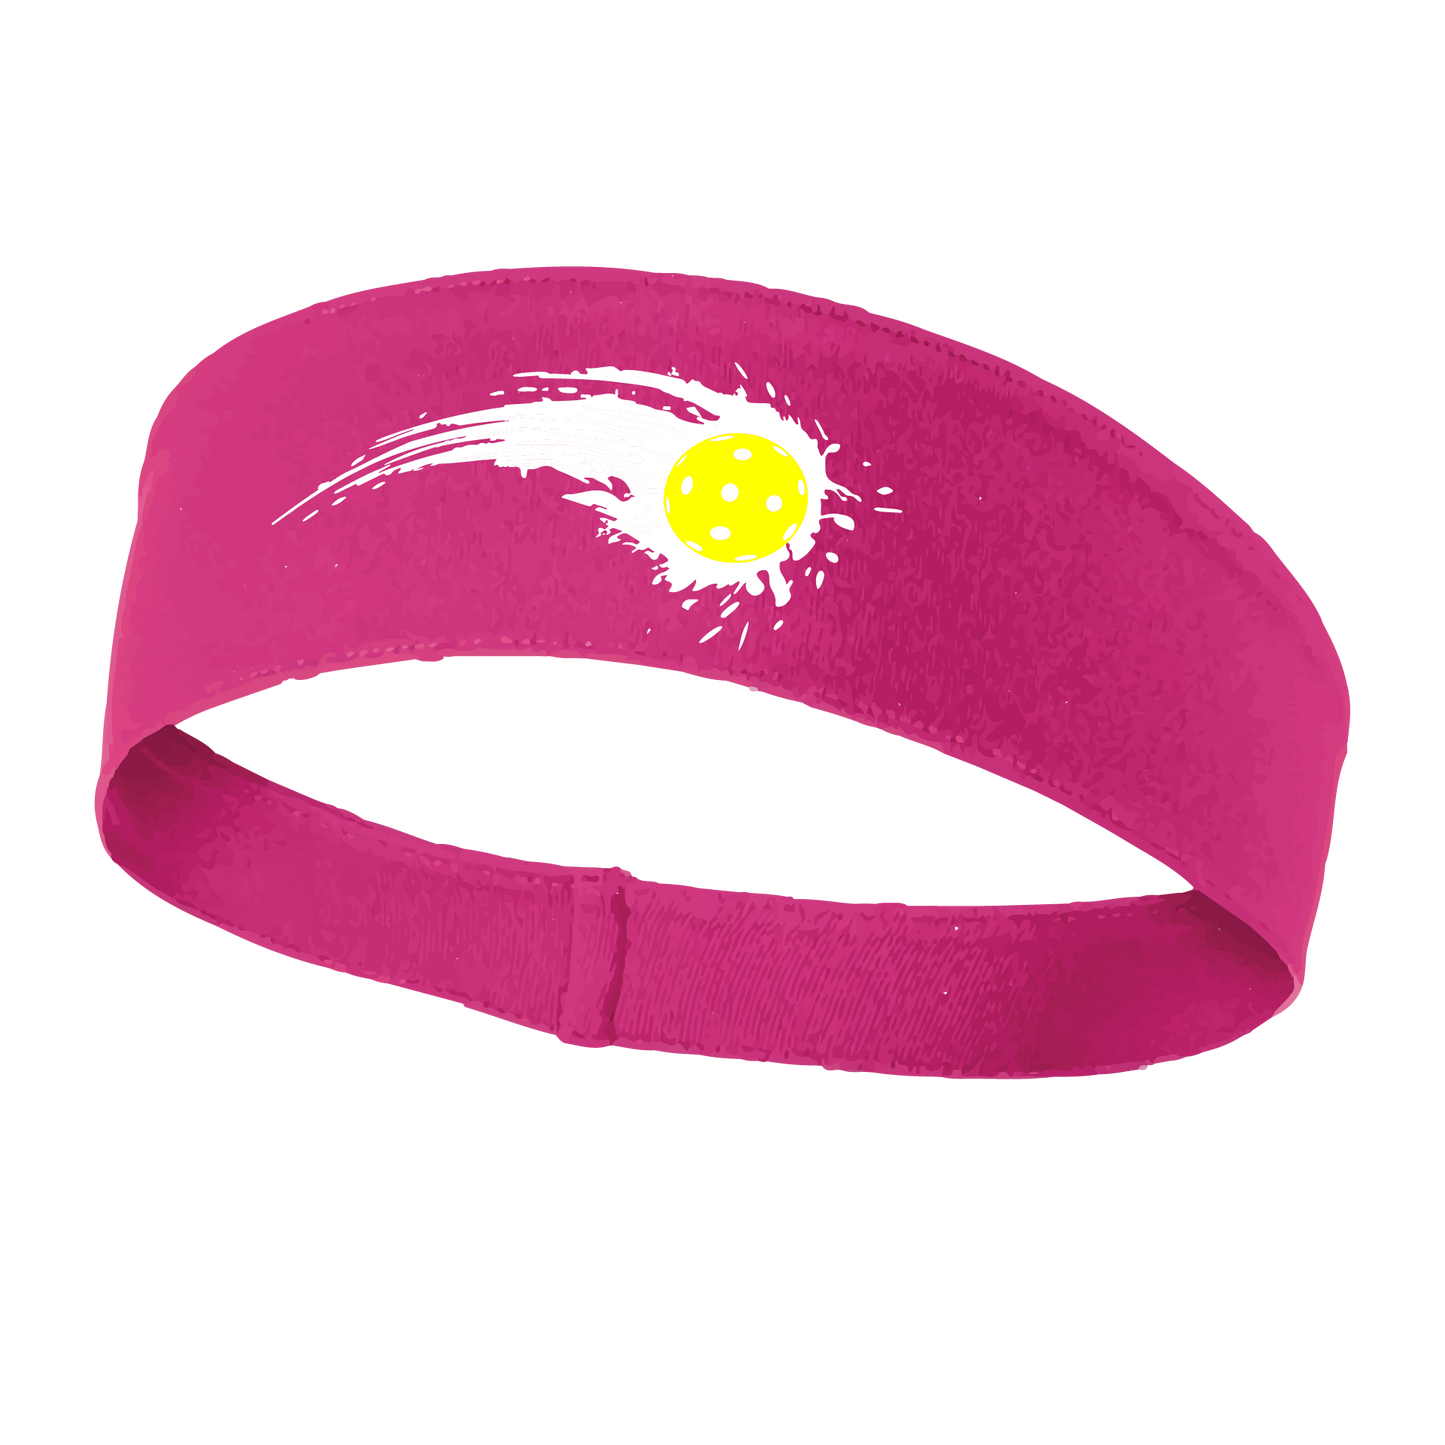 Pickleball Design: Pickleball impact white with yellow ball  This fun, pickleball designed, moisture-wicking headband narrows in the back to fit more securely. Single-needle top-stitched edging. These headbands come in a variety of colors. Truly shows your love for the sport of pickleball!!